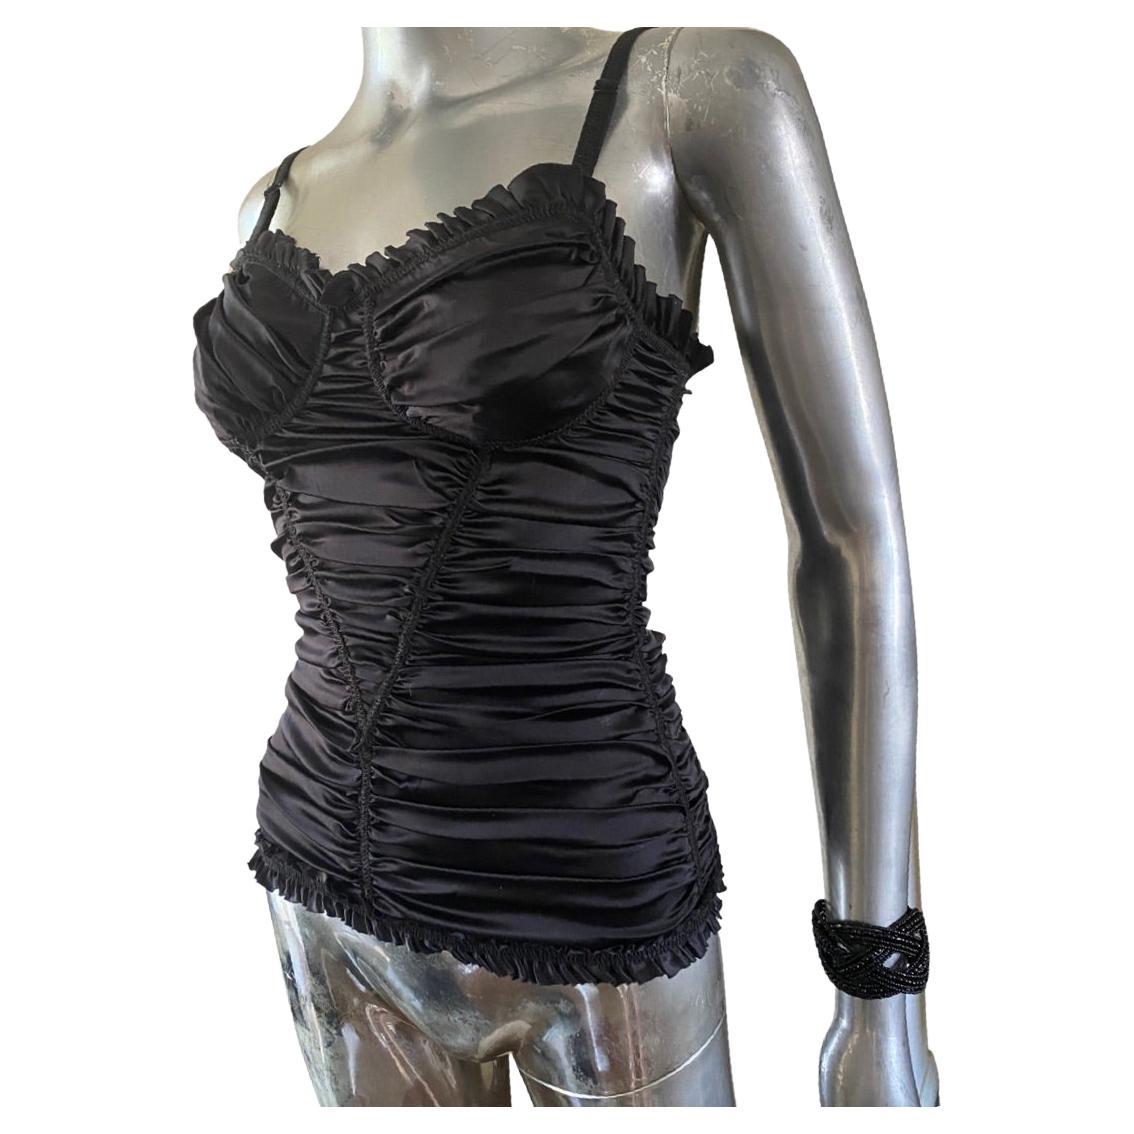 D & G Dolce Gabbana Black Ruched Silk “Lingerie Look" Bustier Blouse Size 4 For Sale